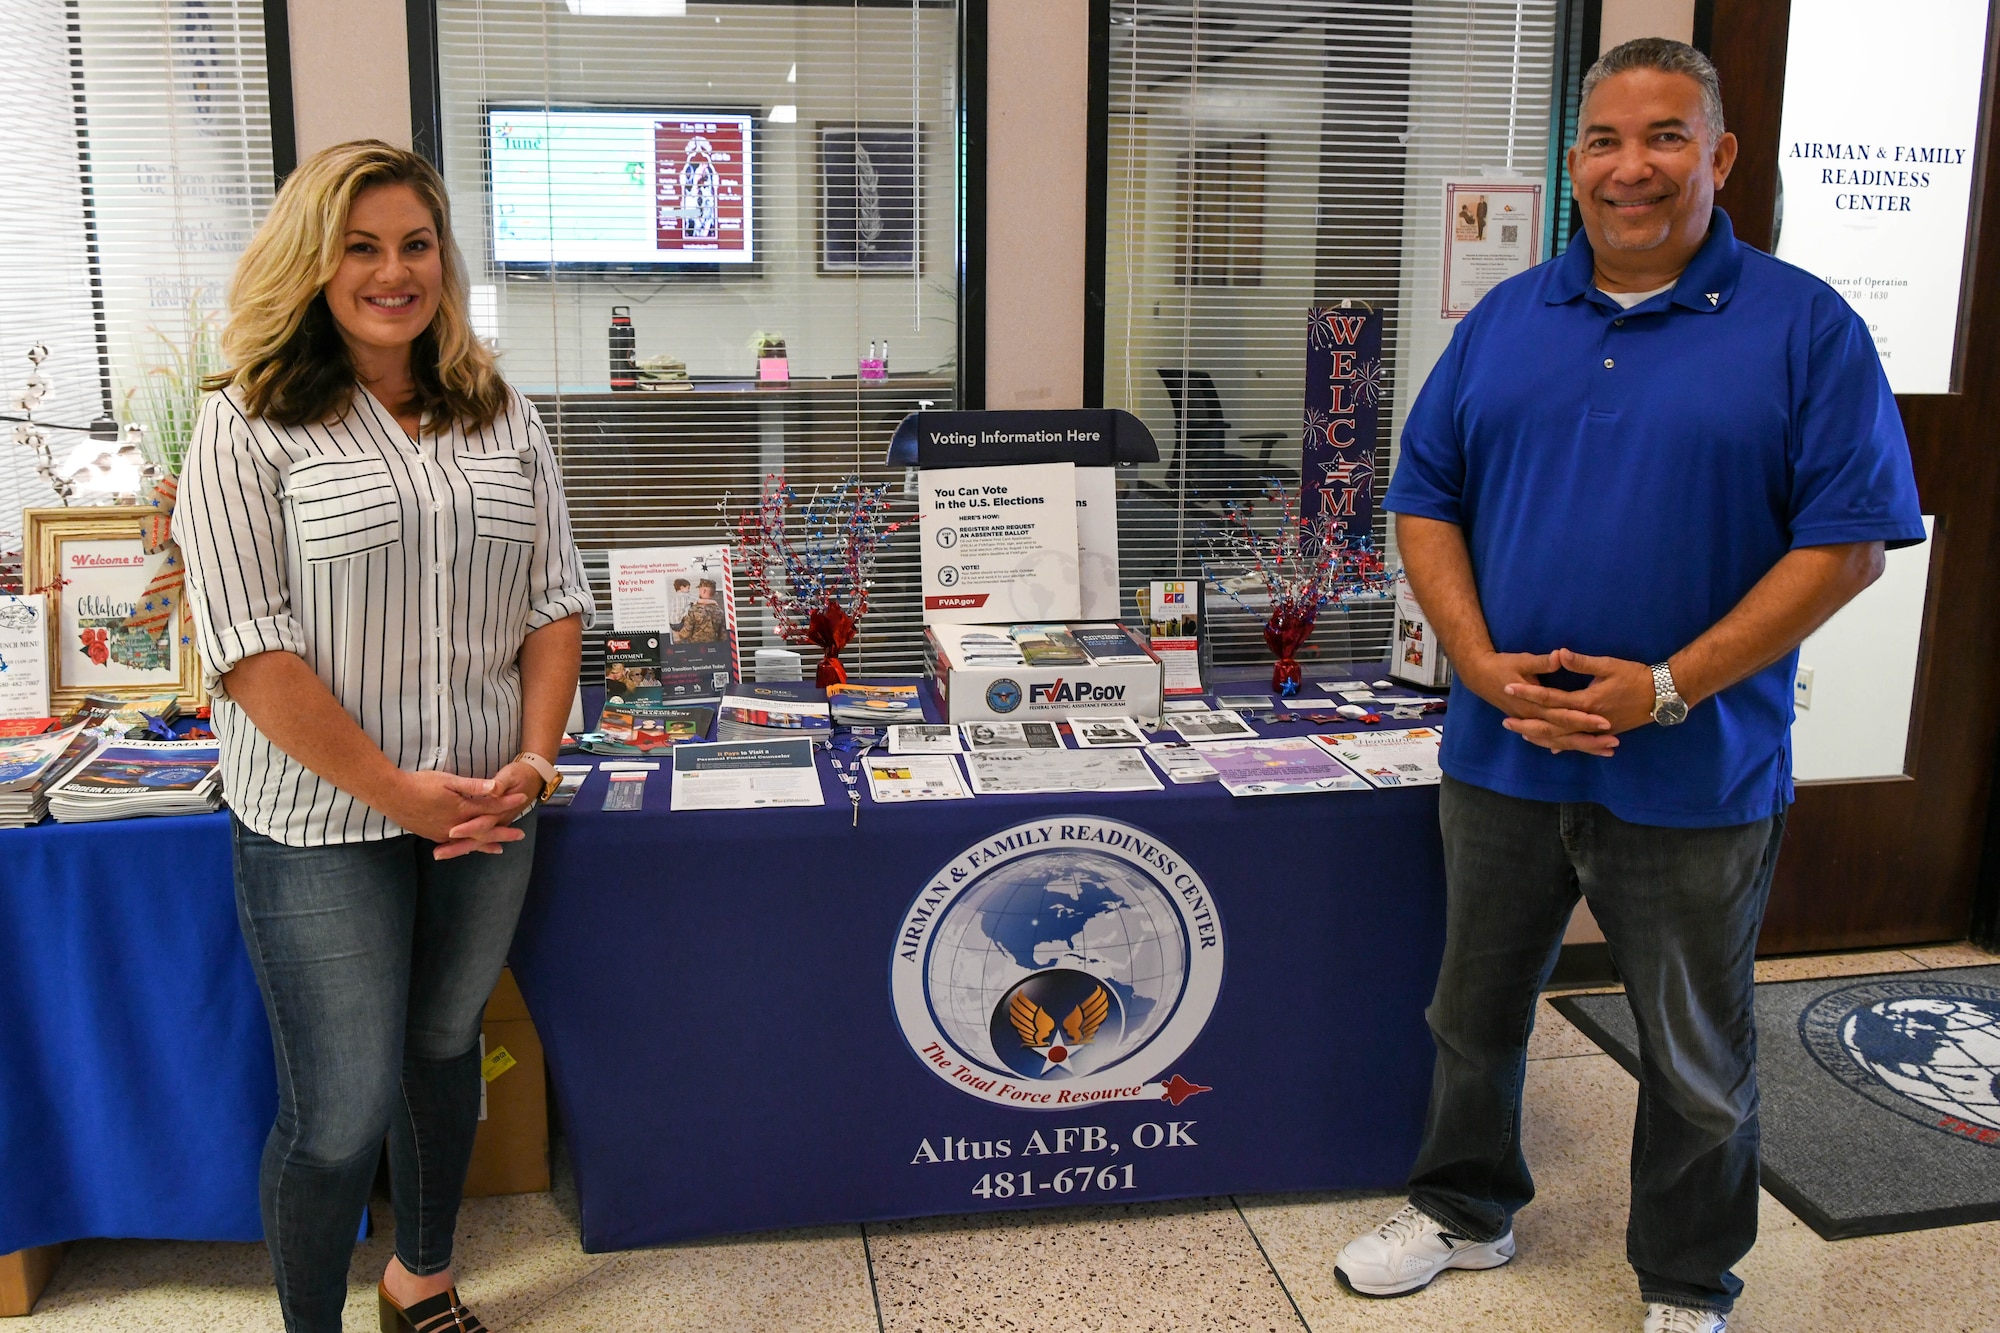 Leah Pretulak (left), 97th Force Support Squadron (FSS) personal financial counselor, and Jerome Davis, 97th FSS community readiness consultant pose for a photo at Altus Air Force Base, Oklahoma, June 14, 2022. The Airman and Family Readiness Center provides several readiness programs to lessen the amount of personal hardships affecting Airmen and helps ensure the 97th Air Mobility Wing mission continues. (U.S. Air Force photo by Airman 1st Class Trenton Jancze)